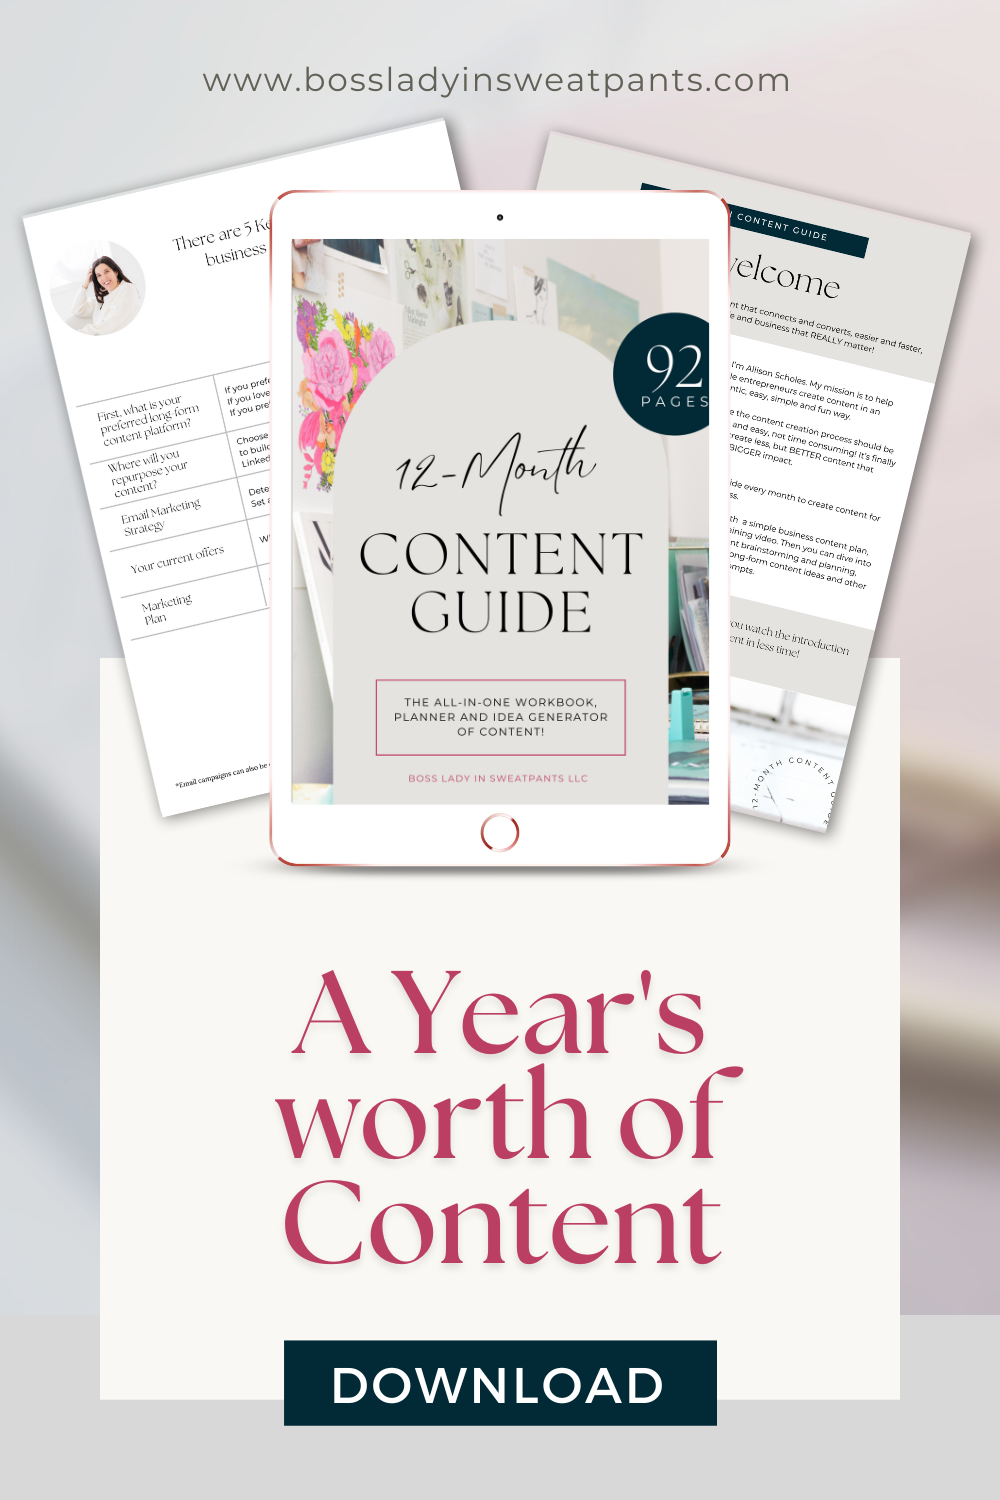 mockup ipad graphic with artwork for the 12-month content guide by Allison Scholes, www.bossladyinsweatpants.com